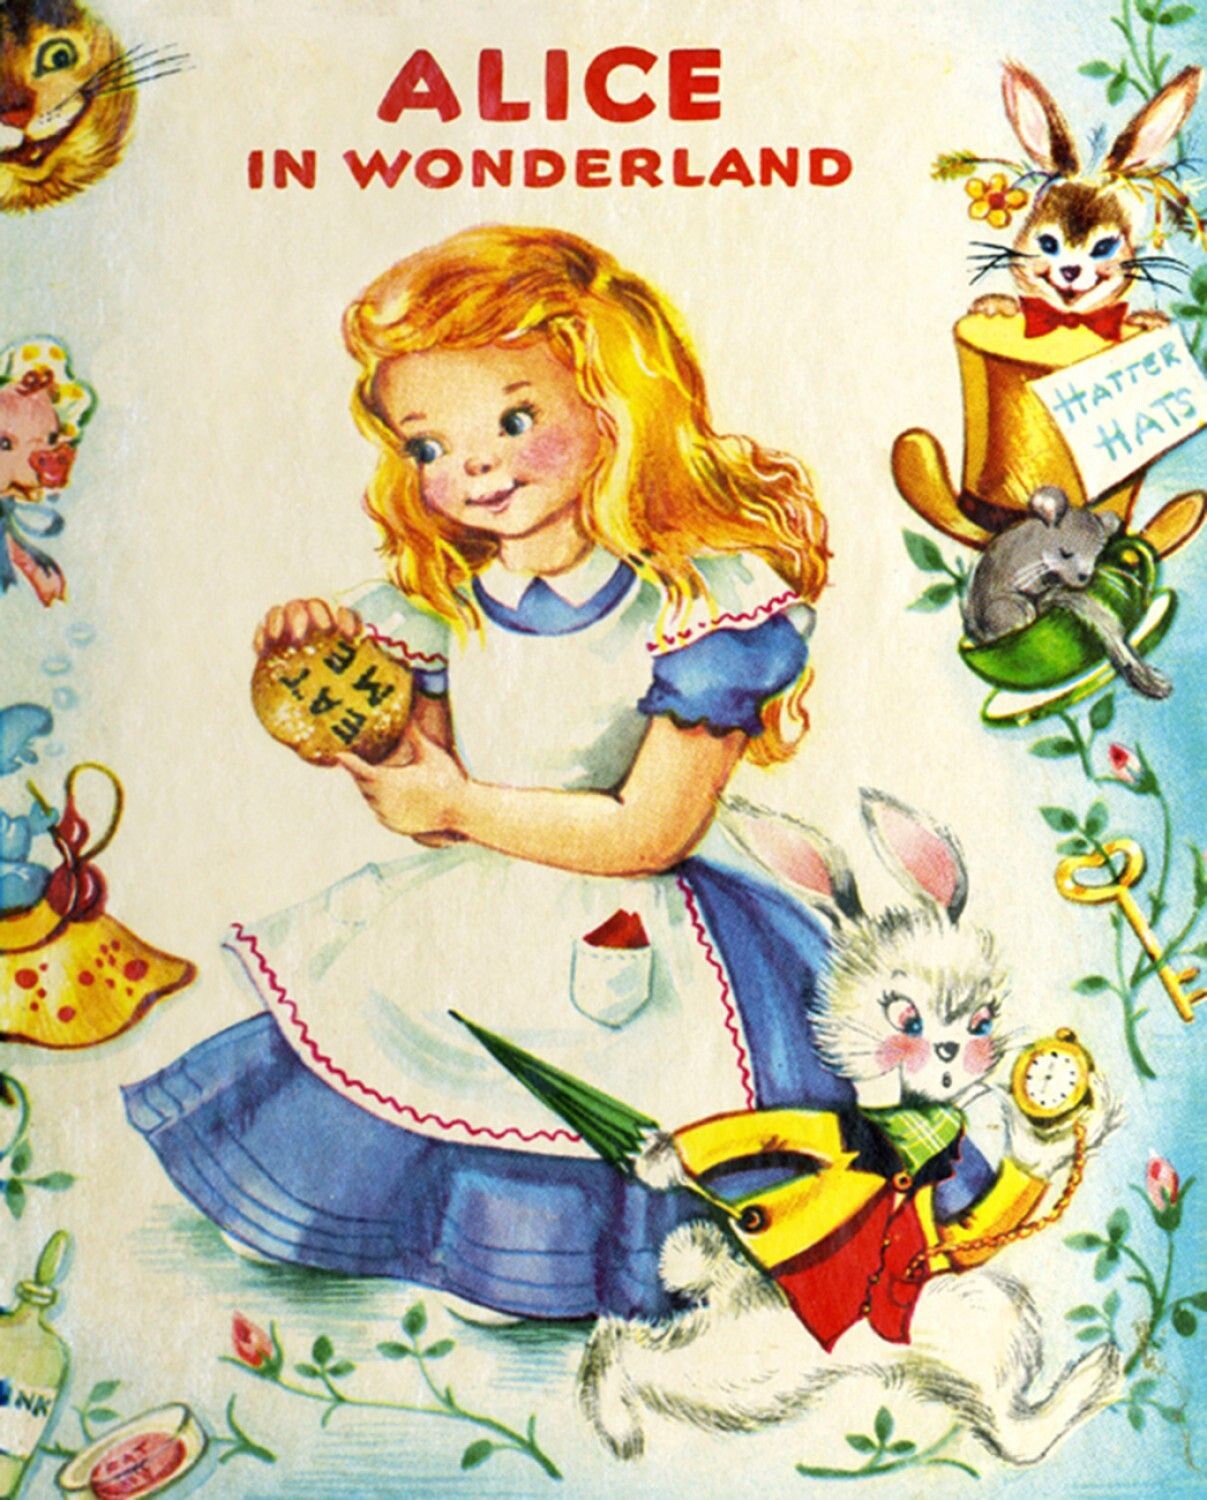 Vintage Storybooks from Four Seasons 36" Panel Alice in Wonderland BW01480C1 Cotton Woven Panel